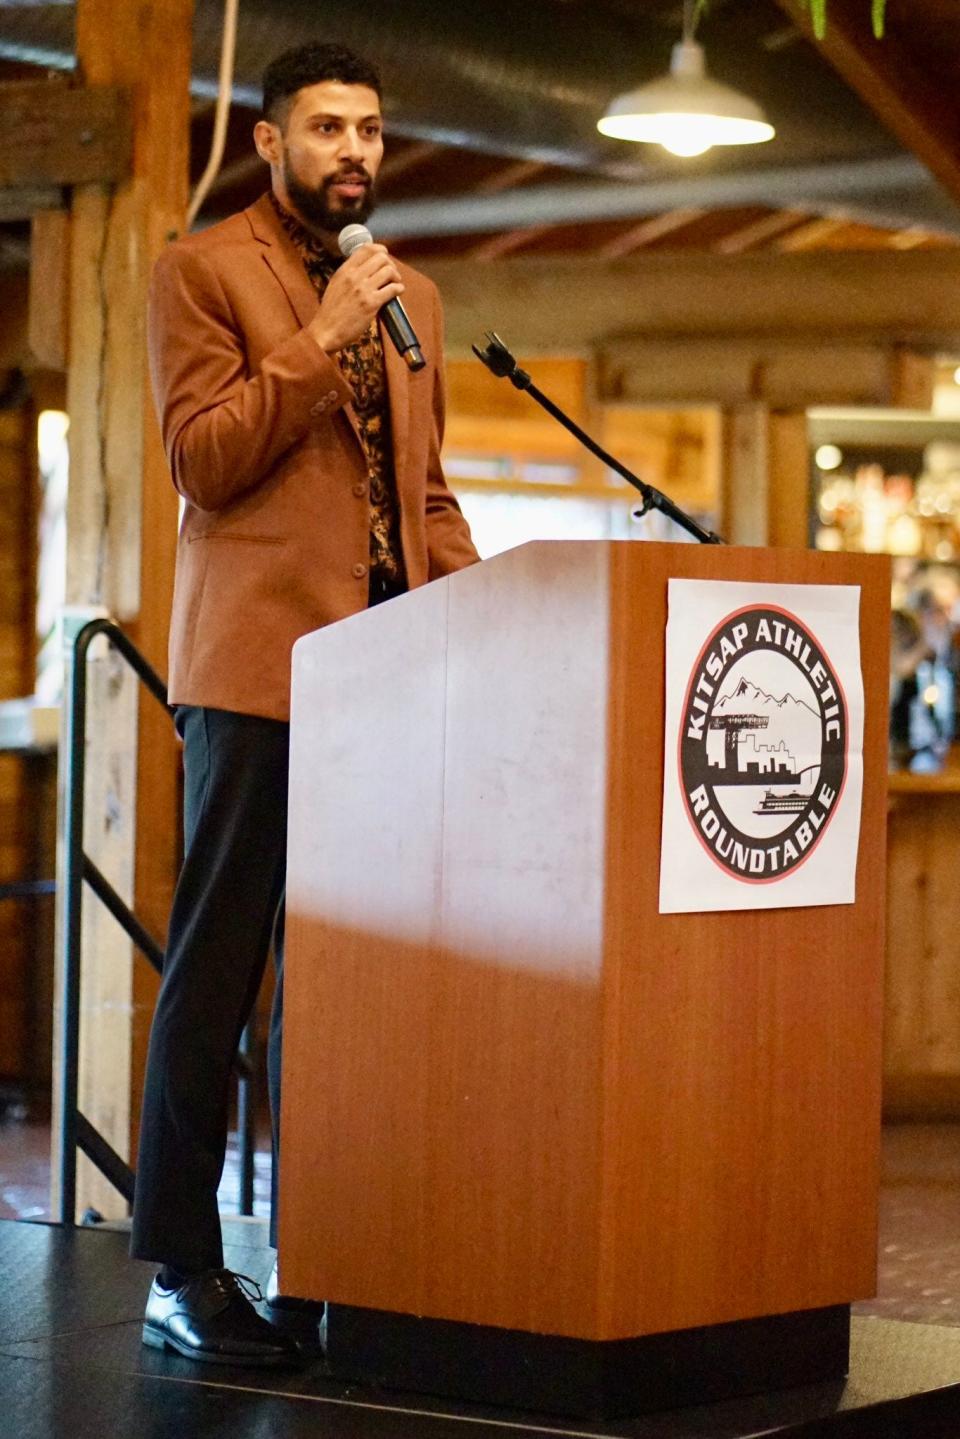 Steven Gray speaks to the crowd at Kiana Lodge during Saturday's Kitsap Sports Hall of Fame ceremony, which honored 2023 inductees.